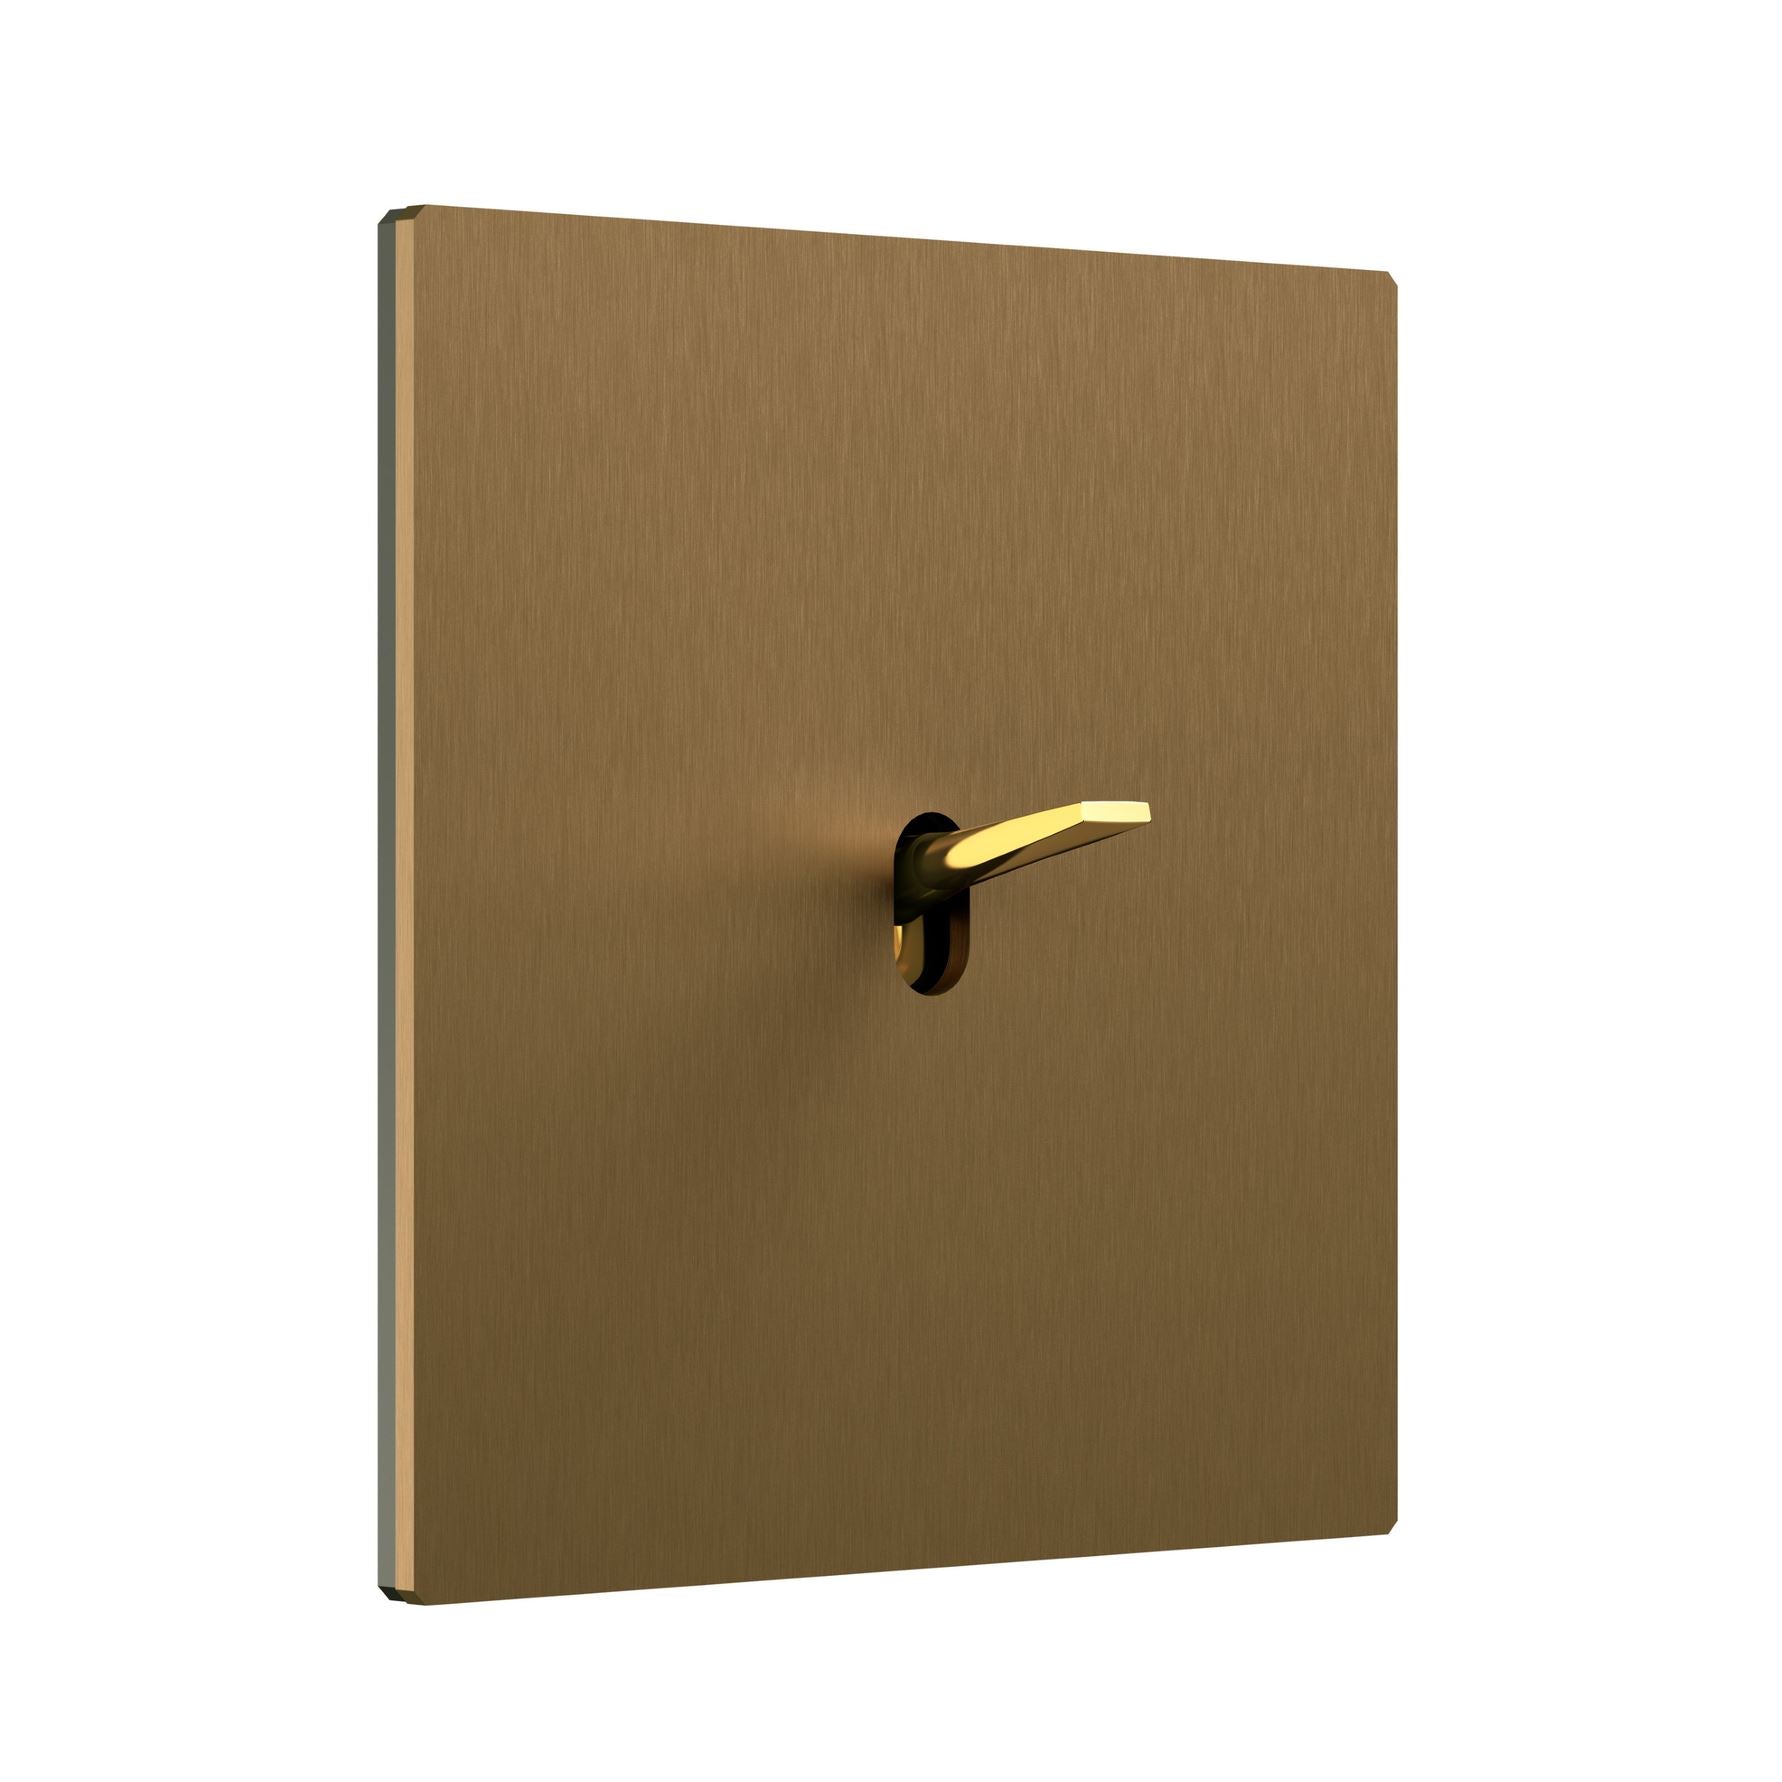 5.1 Switch in Bronze Brass with a Bright Golden Knob